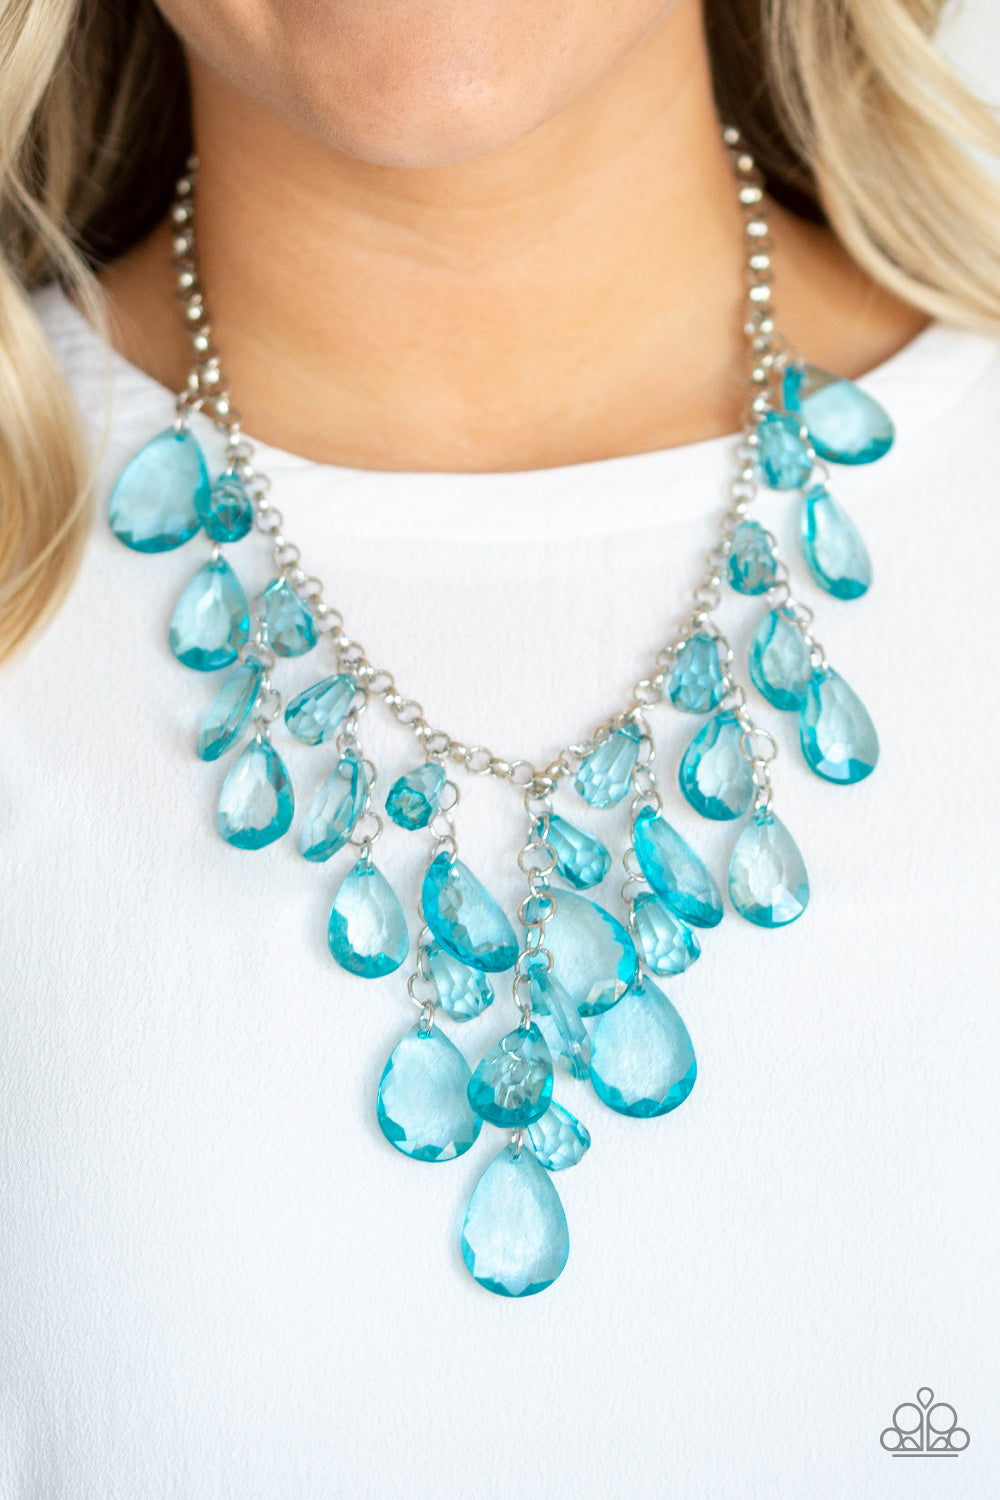 Irresistible Iridescence Blue Necklace - Paparazzi Accessories